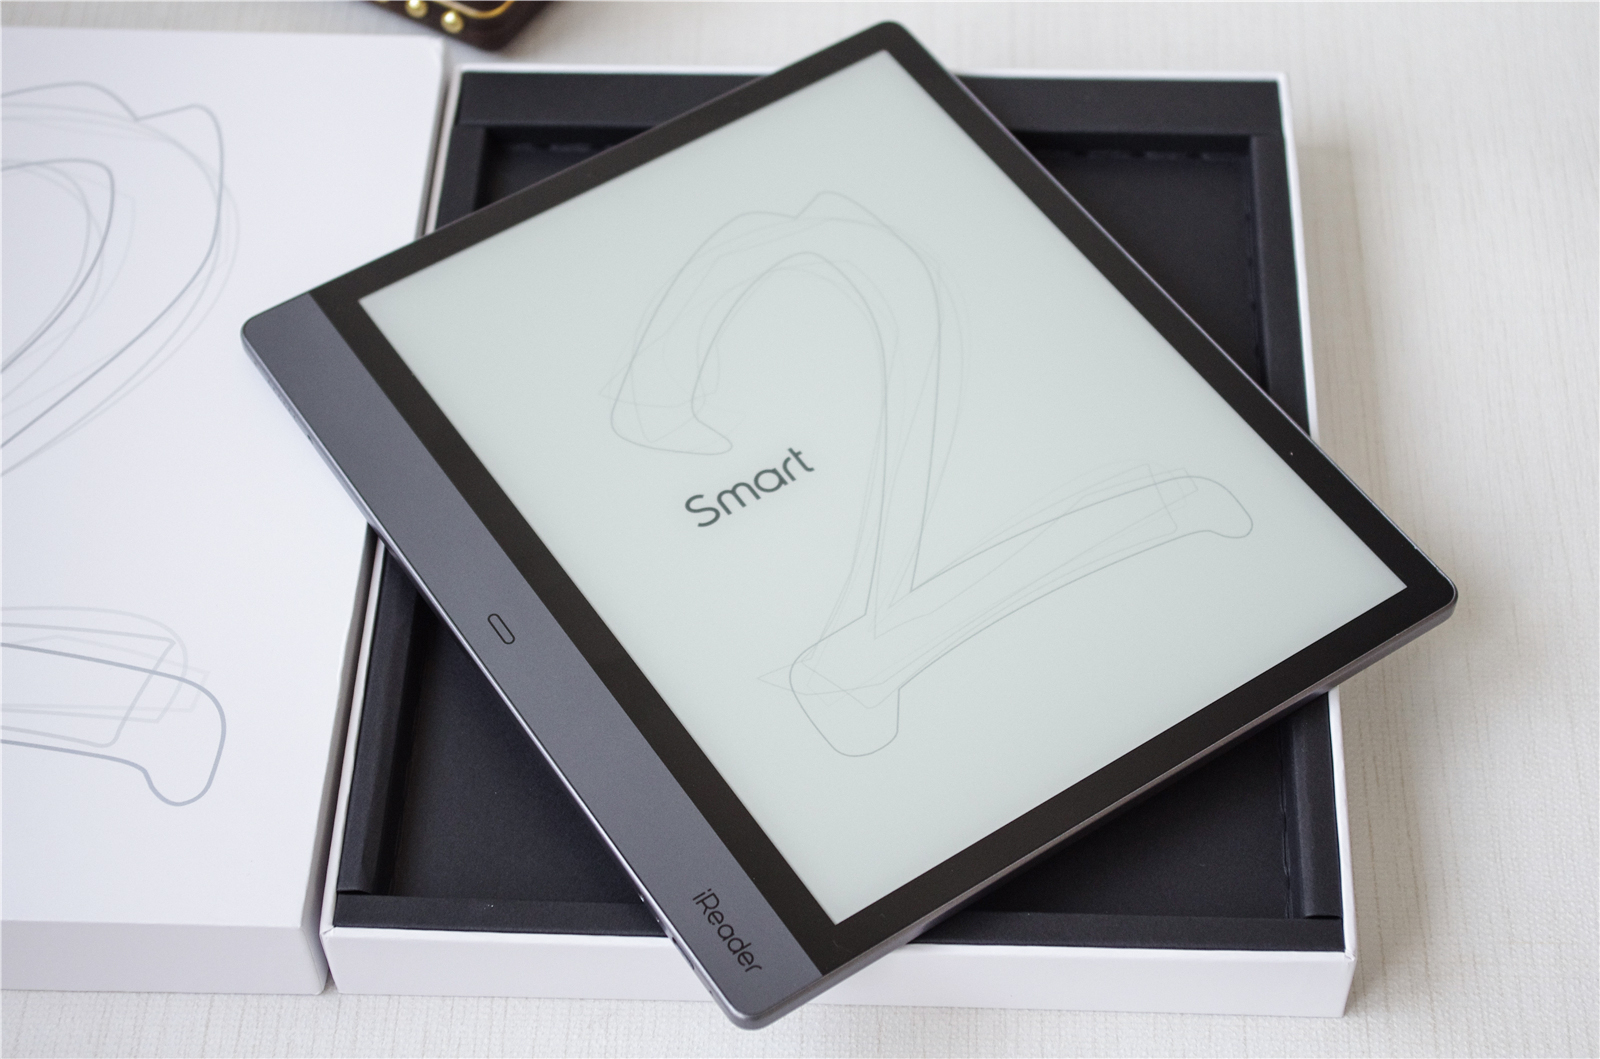 1999 yuan iReader Smart 2 experience: unmatched at the same price